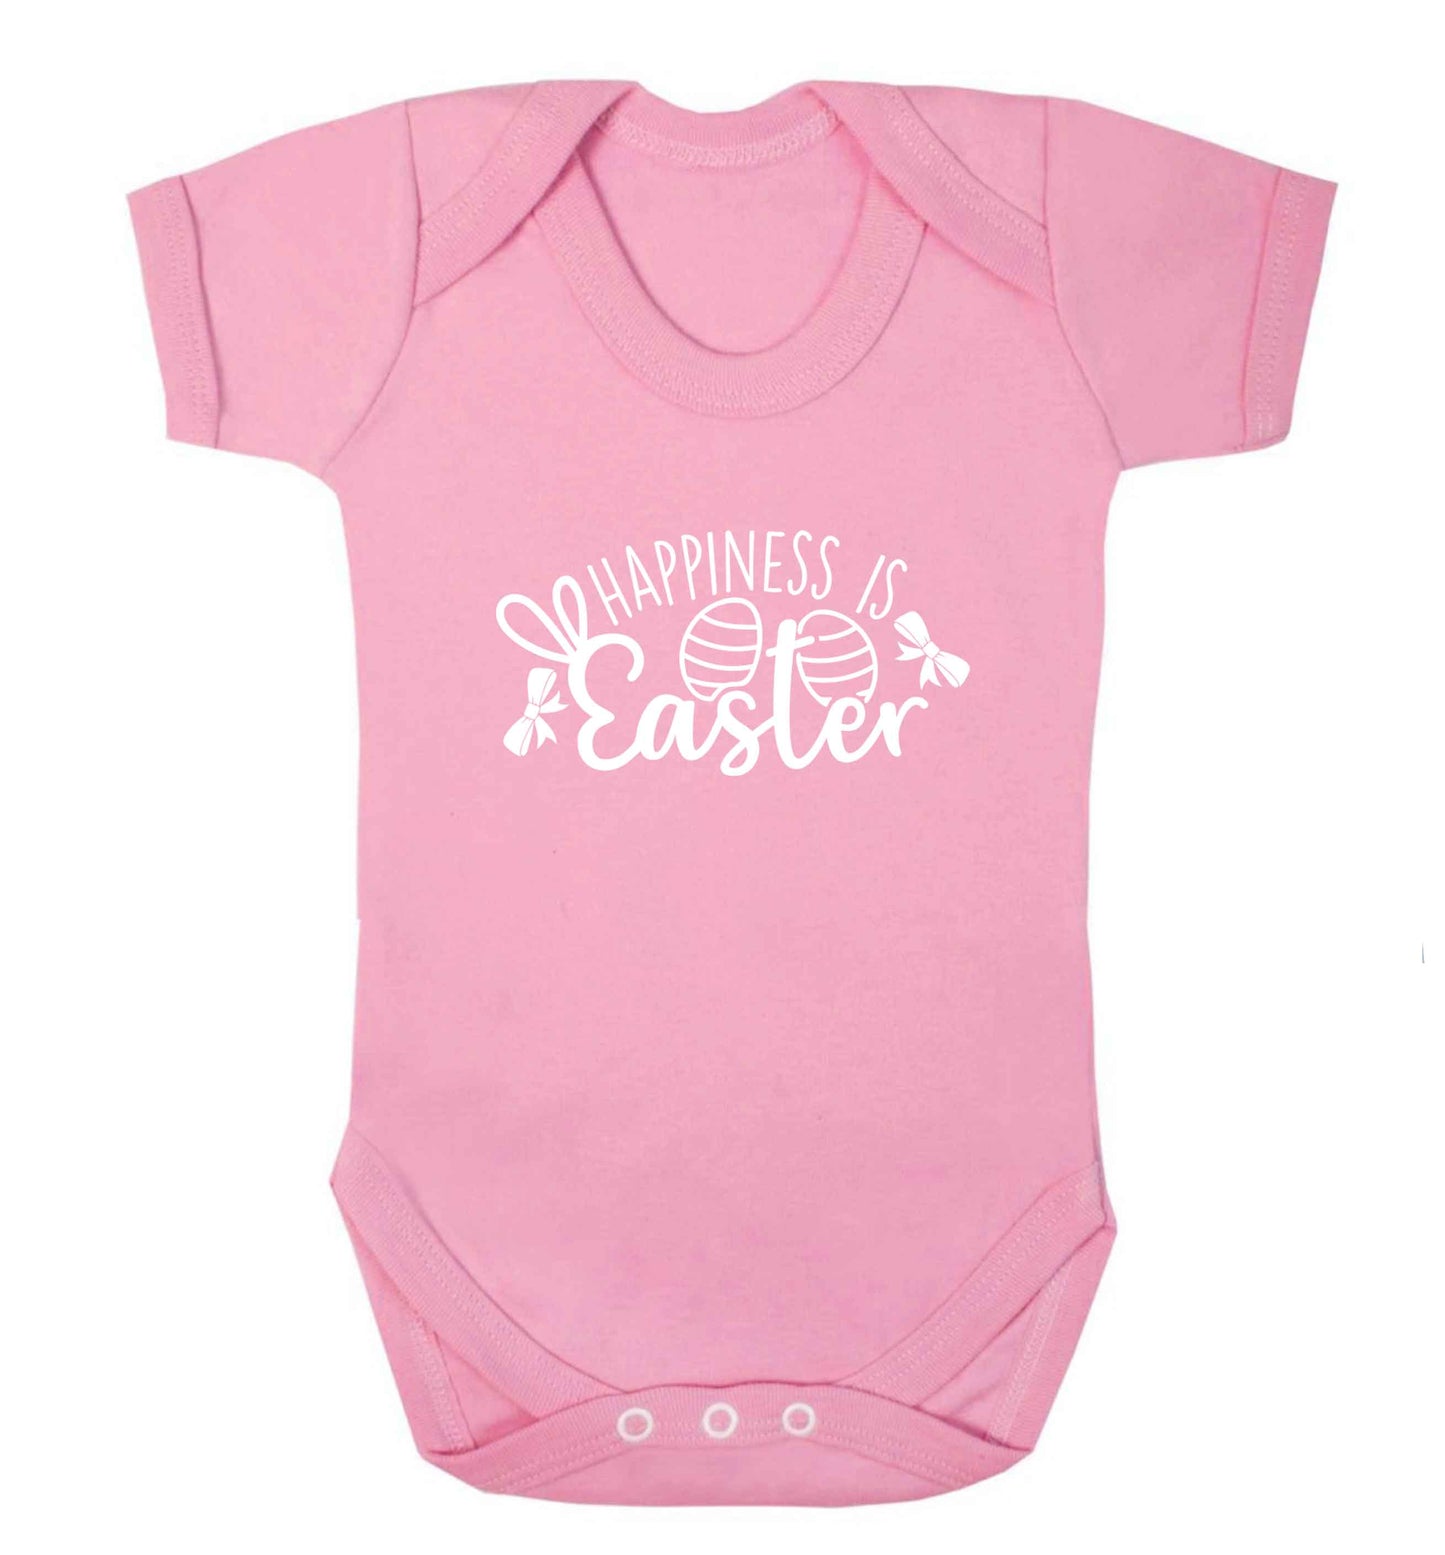 Happiness is easter baby vest pale pink 18-24 months